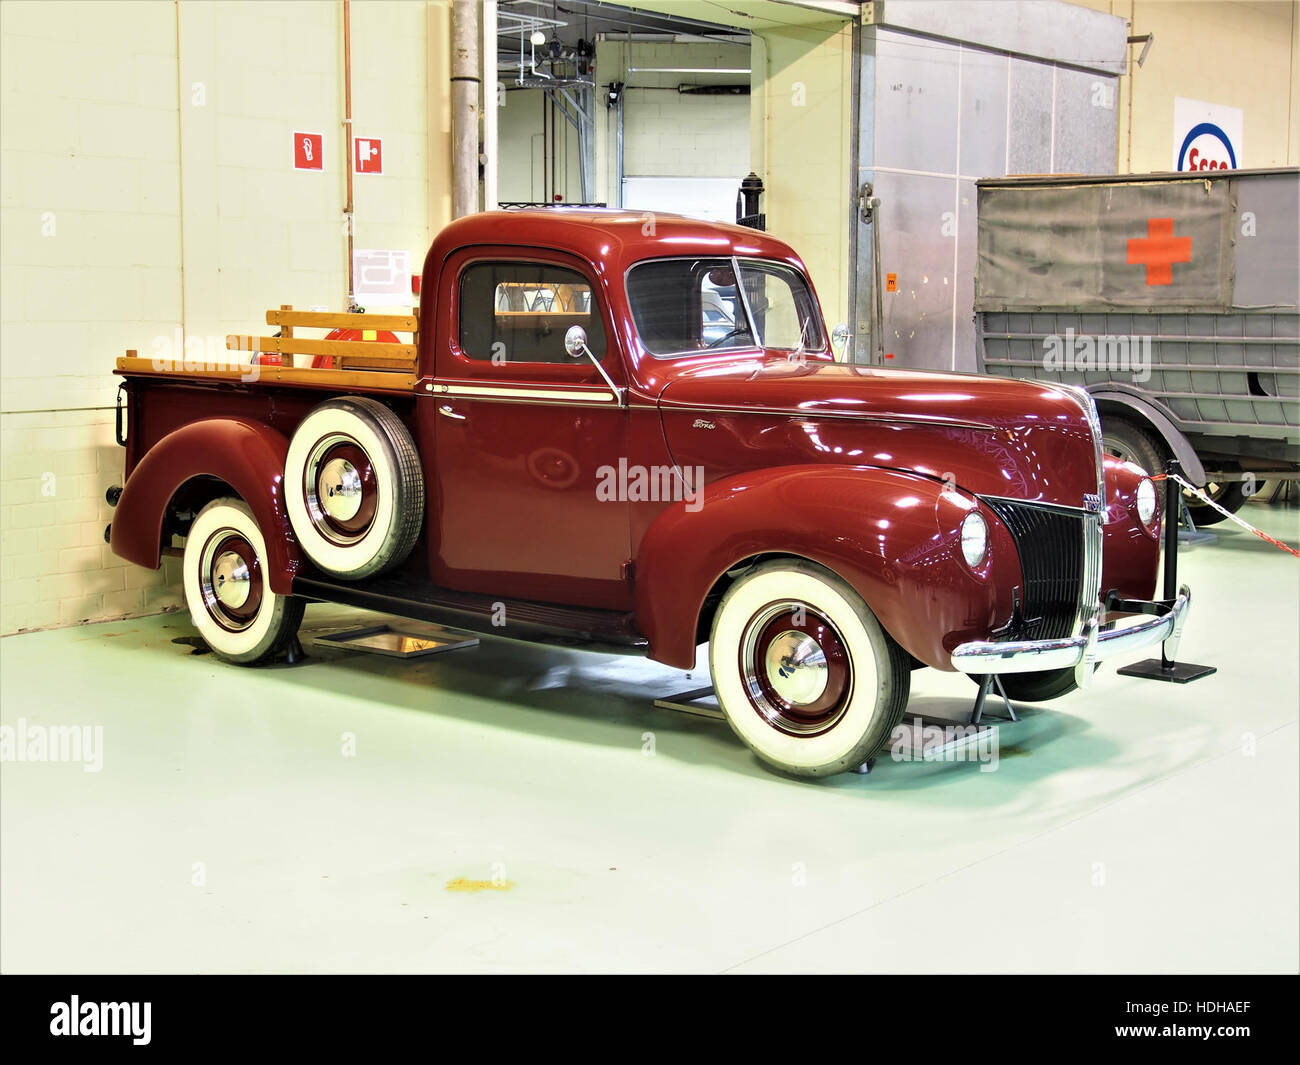 1940 Ford Pickup 83 pic9 Banque D'Images